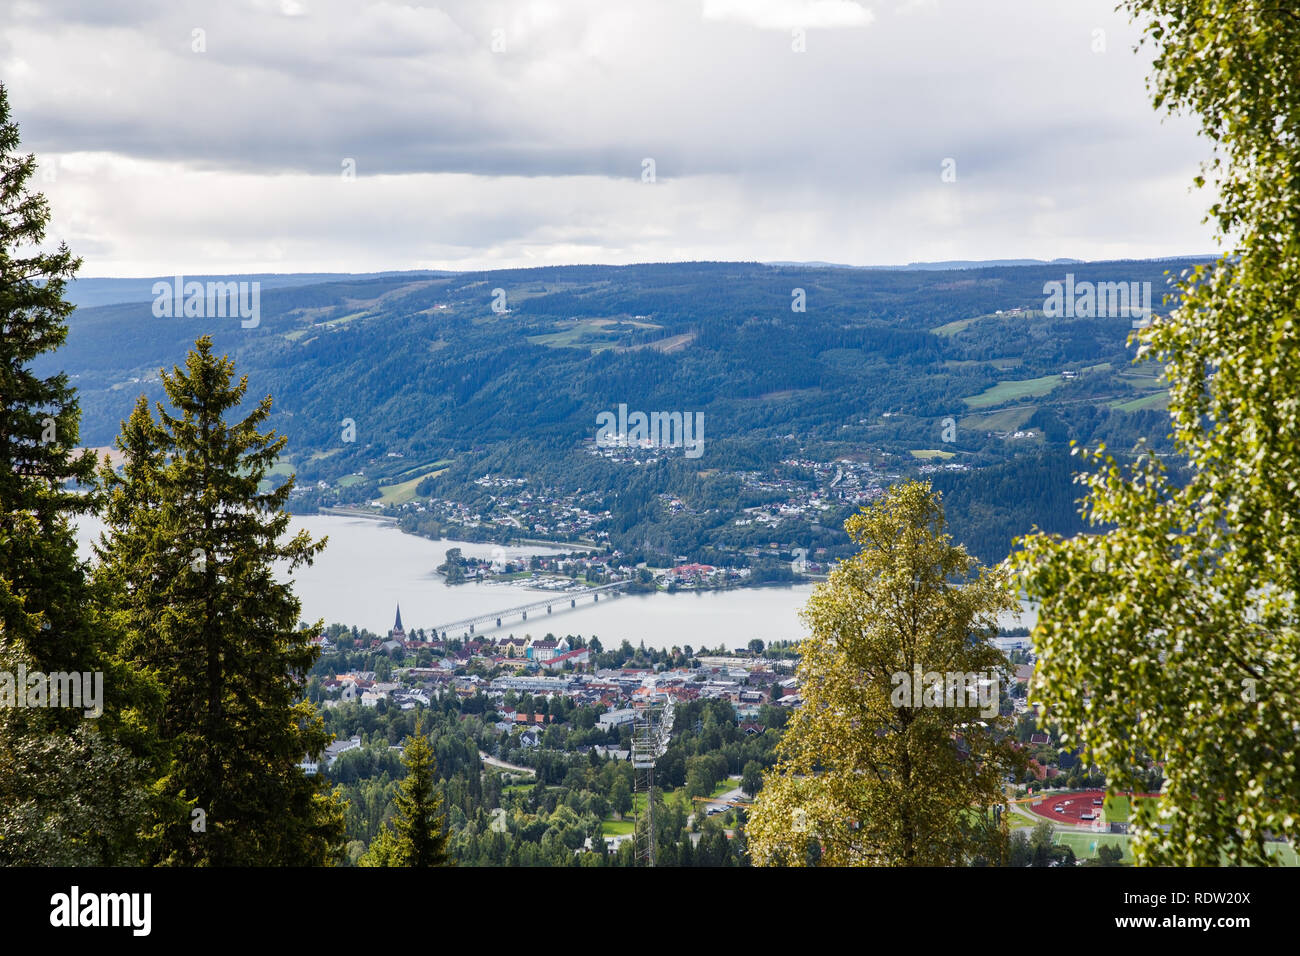 Landscape with mountains, river and buildings in Lillehammer town, Norway  Stock Photo - Alamy